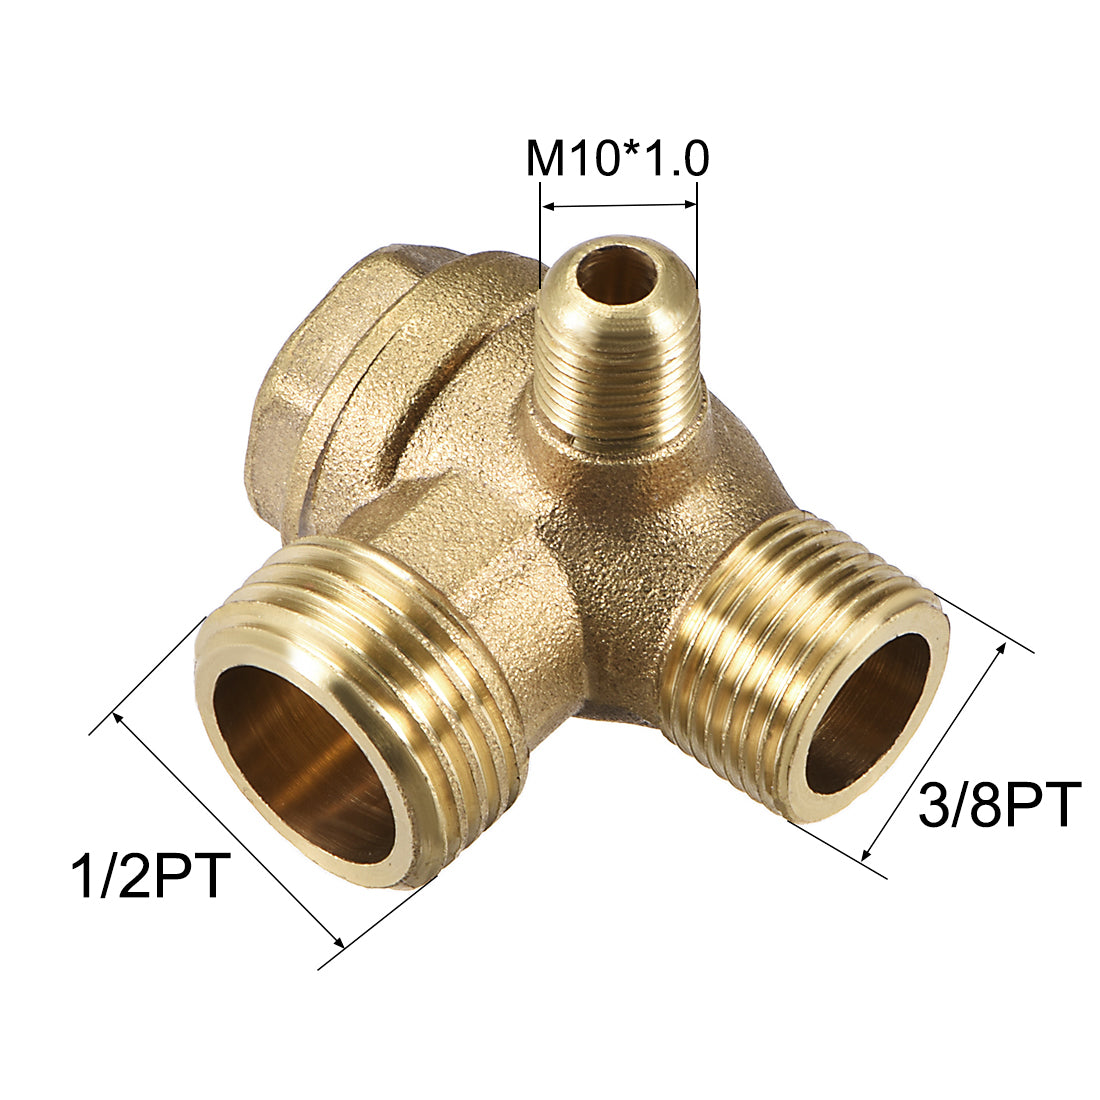 uxcell Uxcell Air Compressor Check Valve 90 Degree Male Threaded Brass 3/8PTx1/2PTxM10 3Pcs